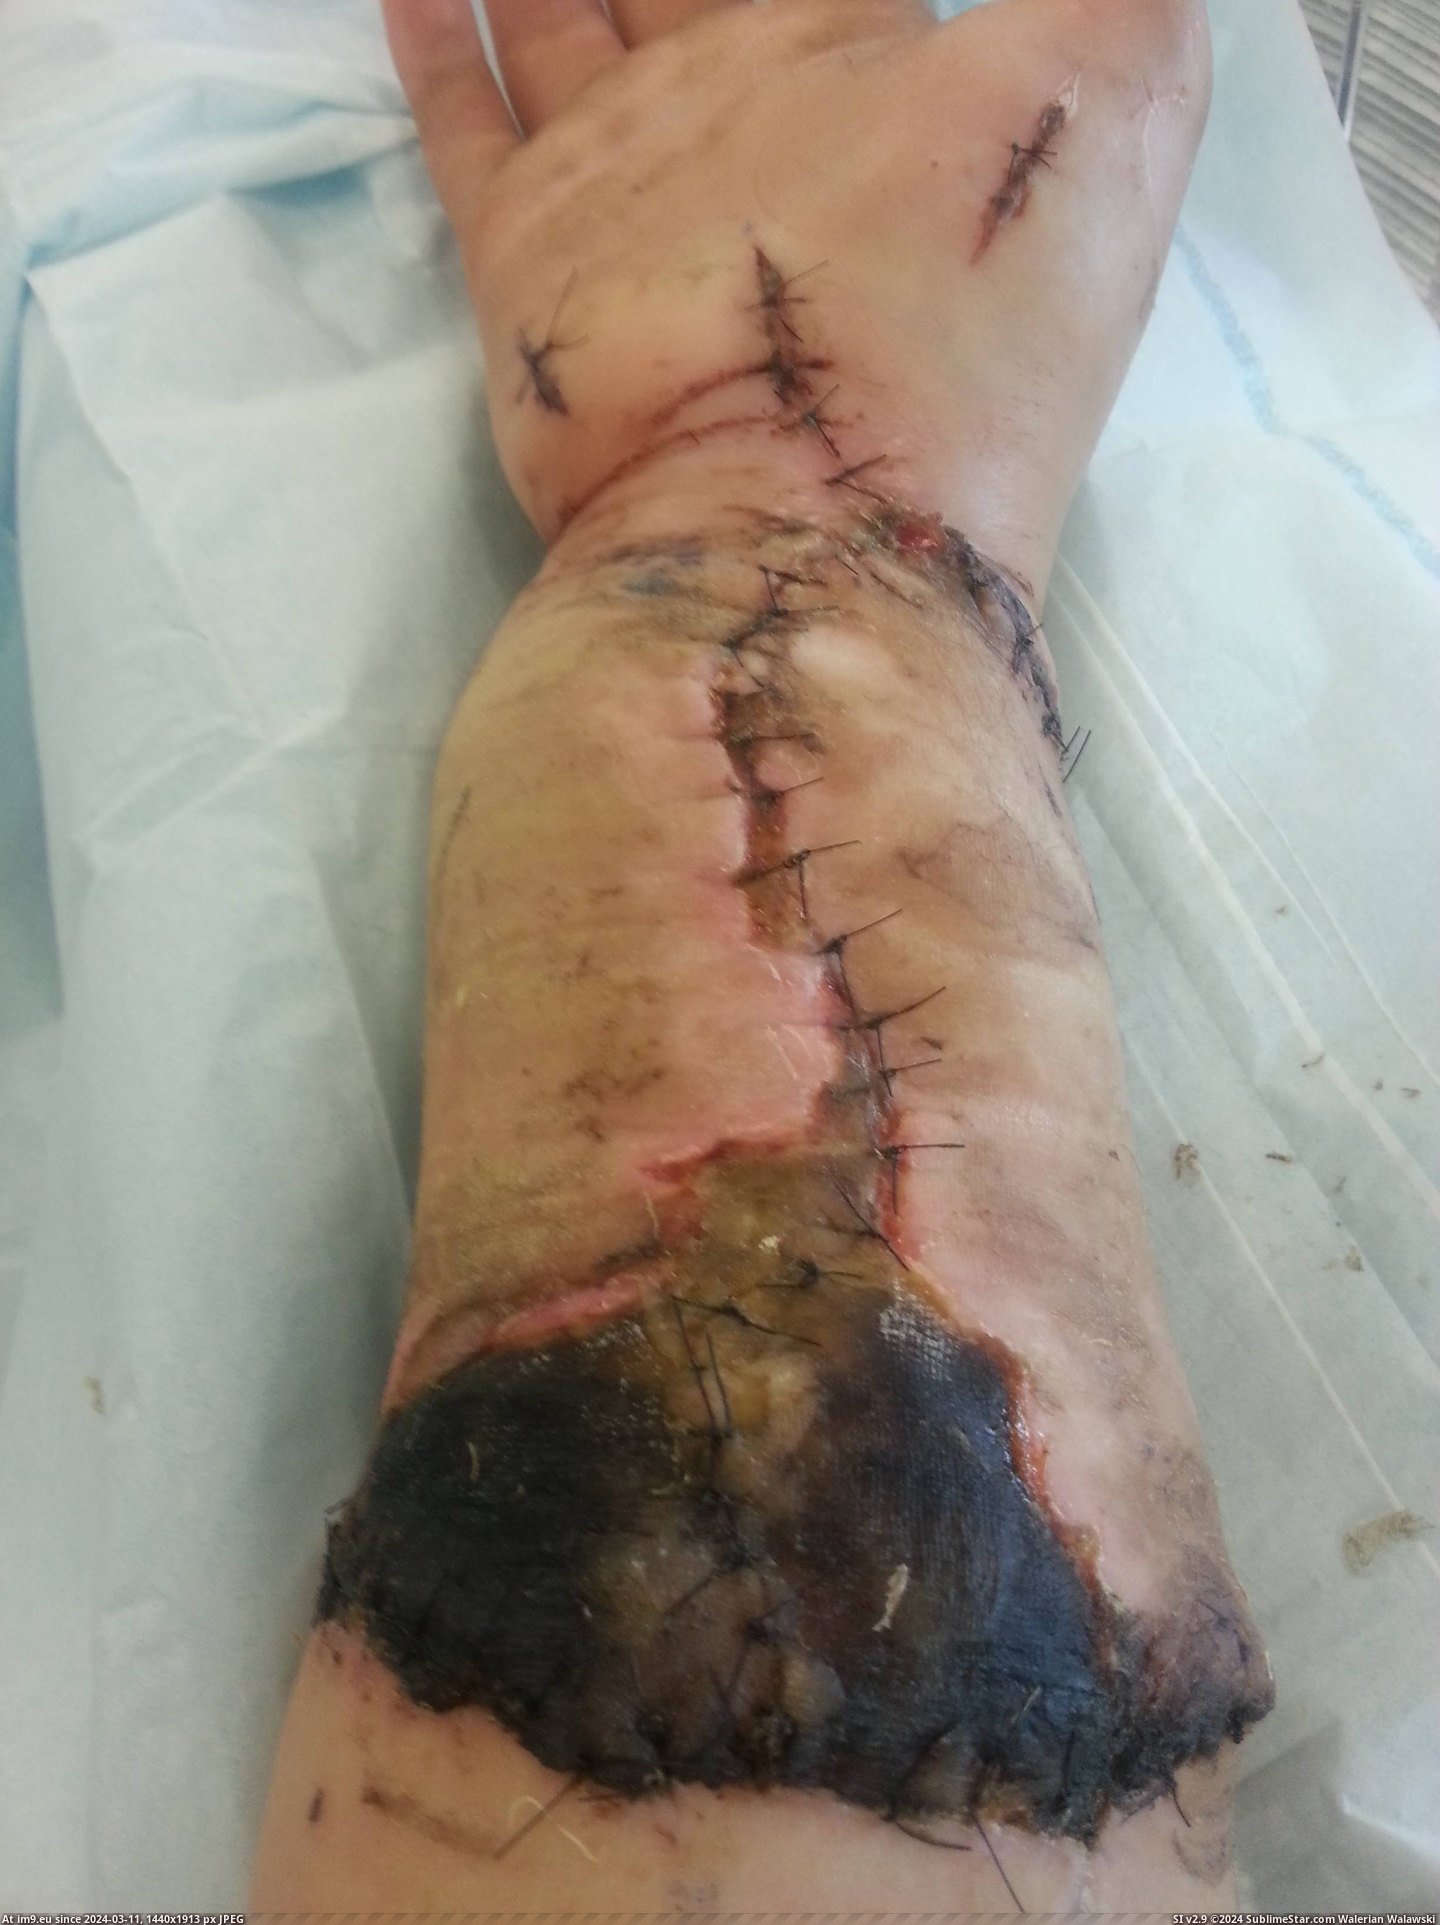 #Wtf #Photos #Guy #Lathe #Remeber #Arm #Ripped #Progress [Wtf] Remeber the guy whos arm got ripped off in a lathe? Well im back with photos on the progress. 4 Pic. (Image of album My r/WTF favs))